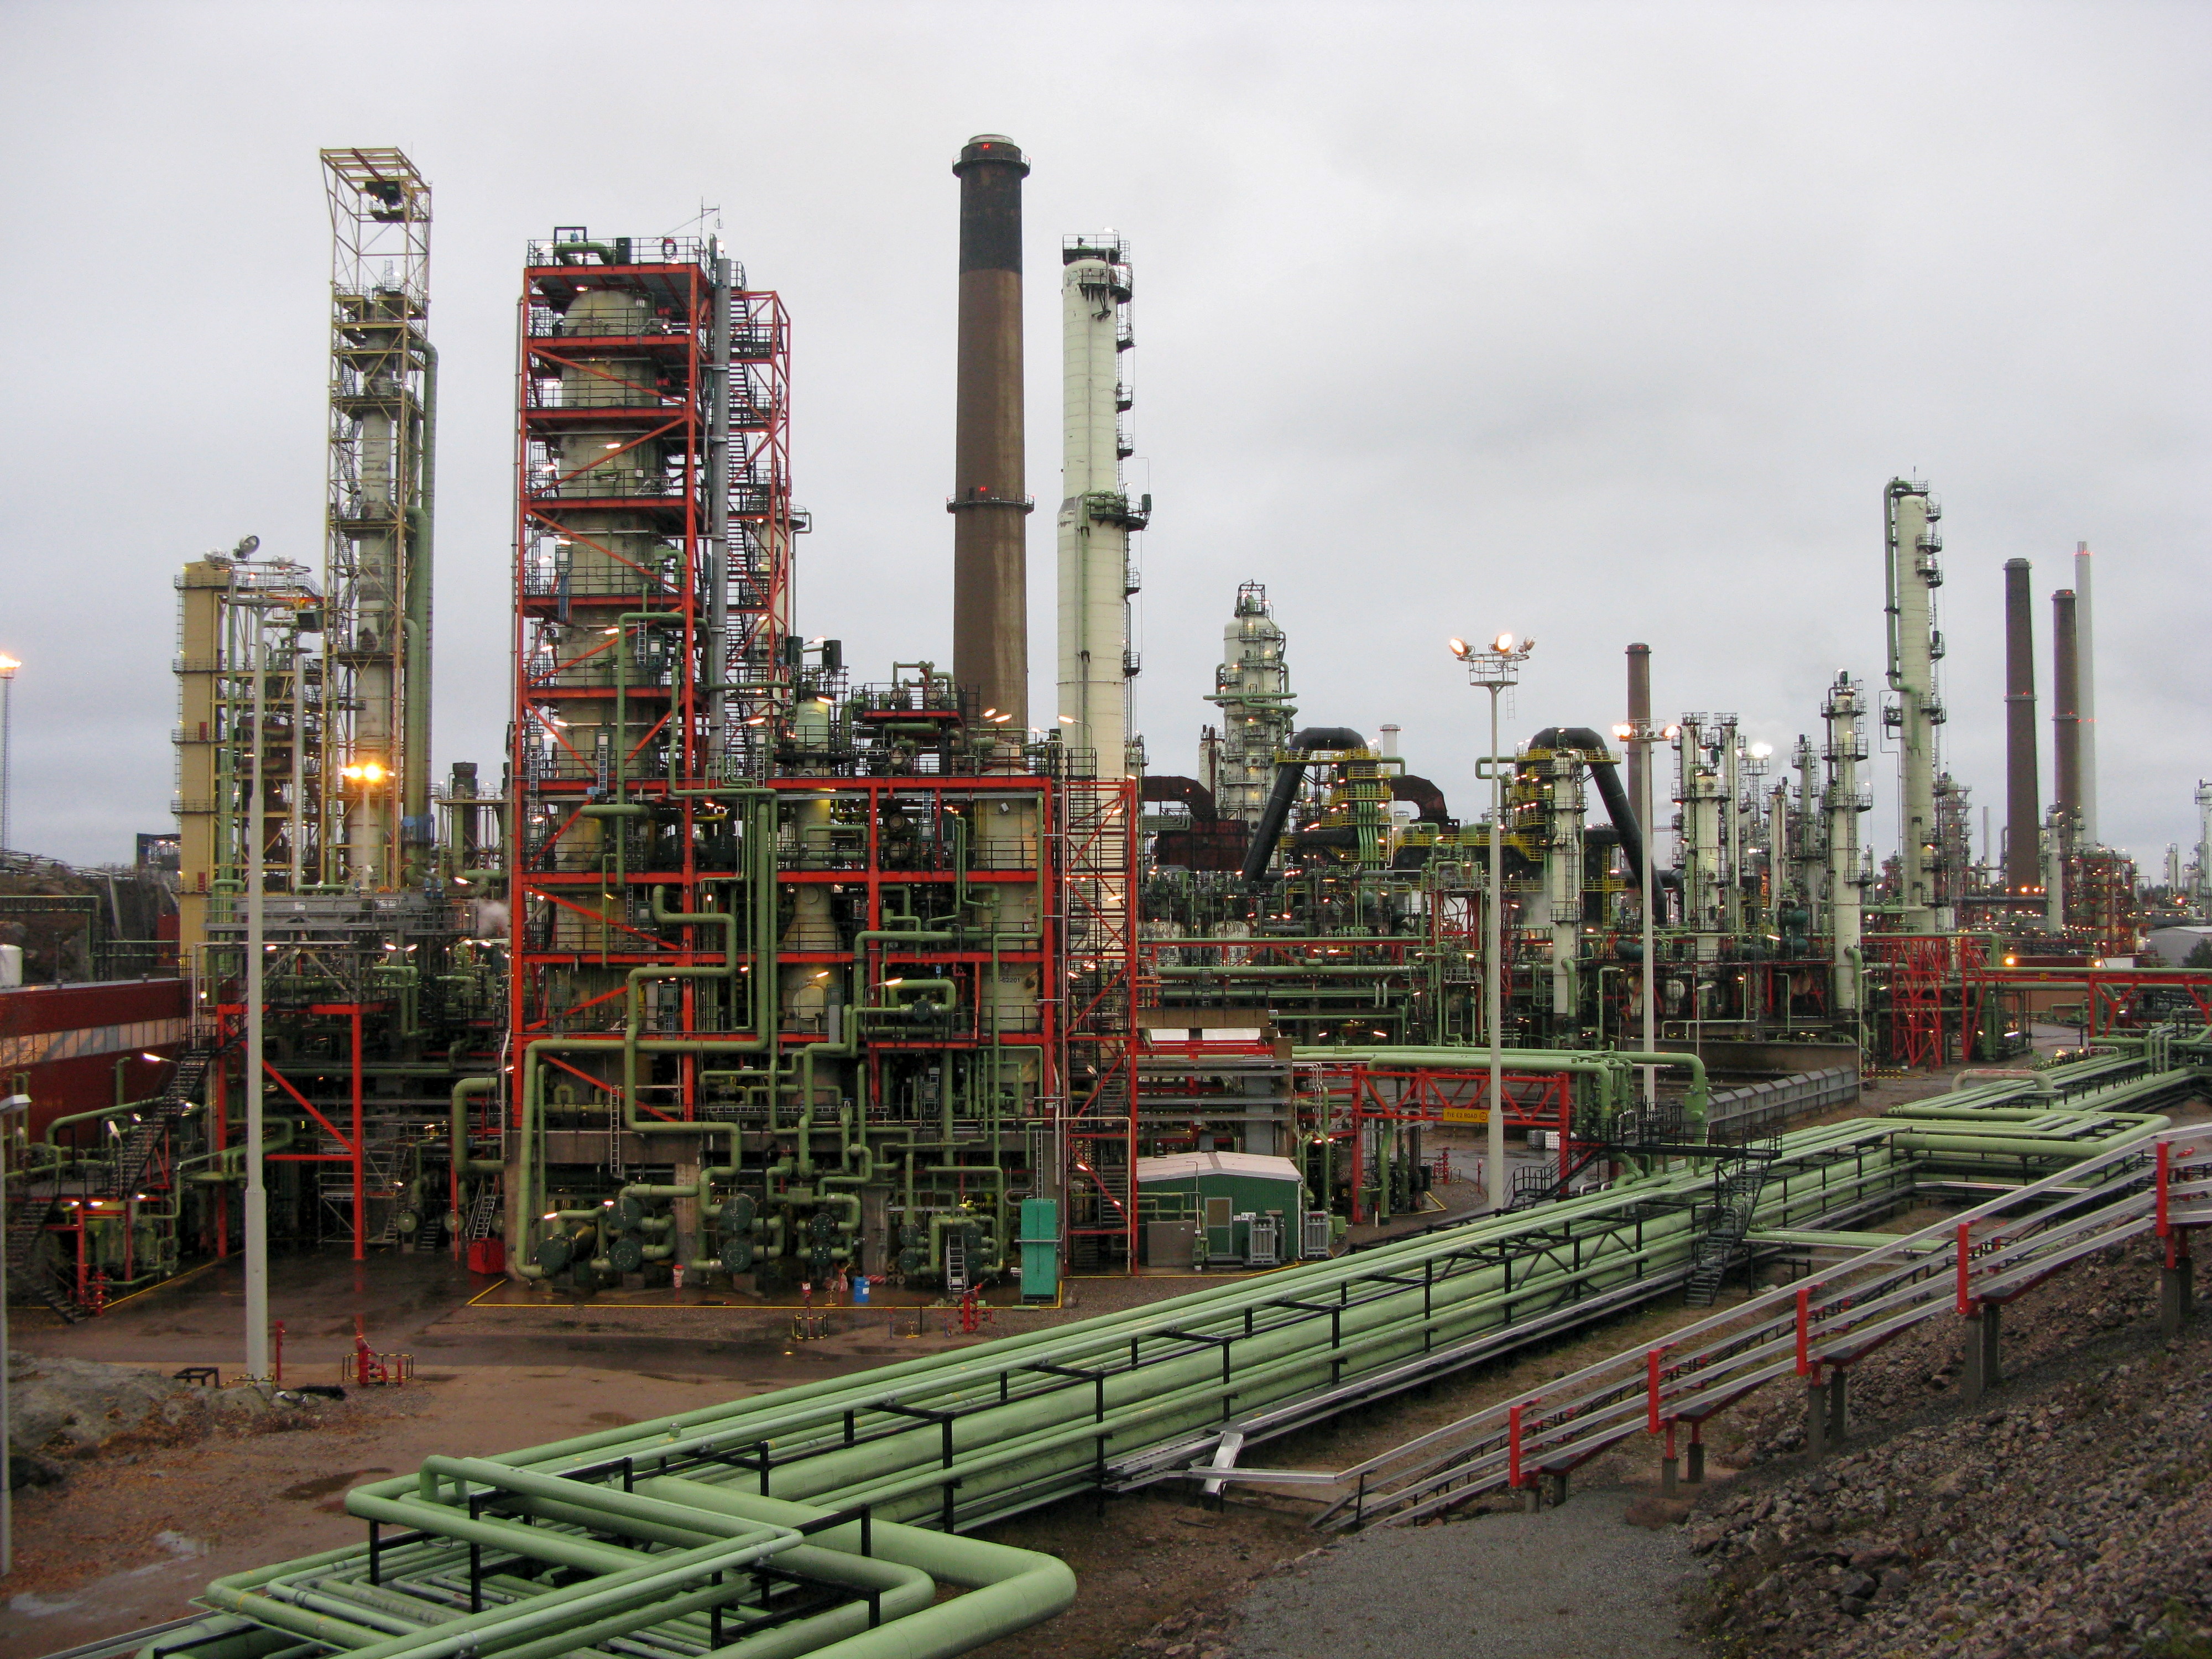 General view of Neste's oil refinery, with a total refining capacity of about 13.5 million tonnes per year, in Porvoo